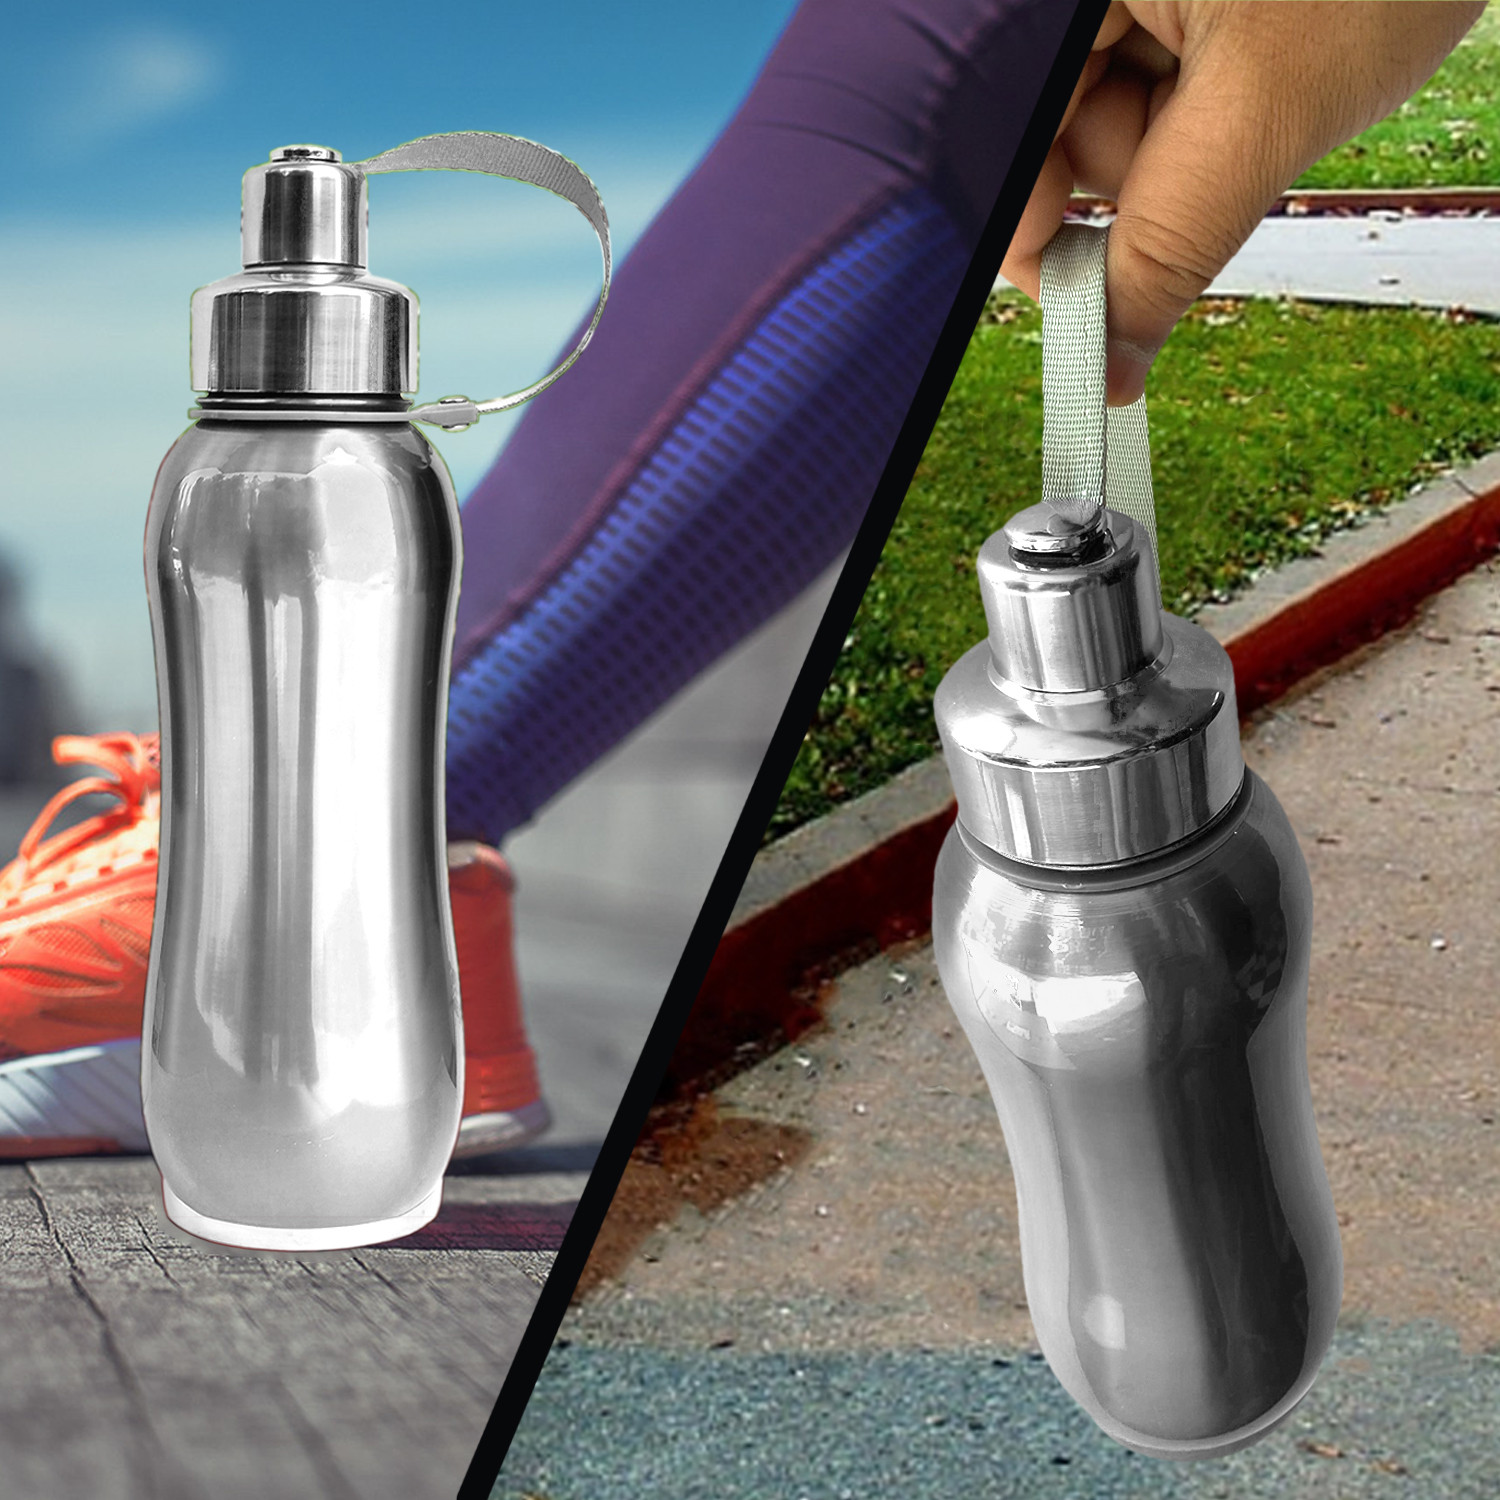 Kuber Industries Stainless Steel Insulated Water Bottle With Strainer For Home & Traveling, 1Ltr. (Silver) 54KM4313